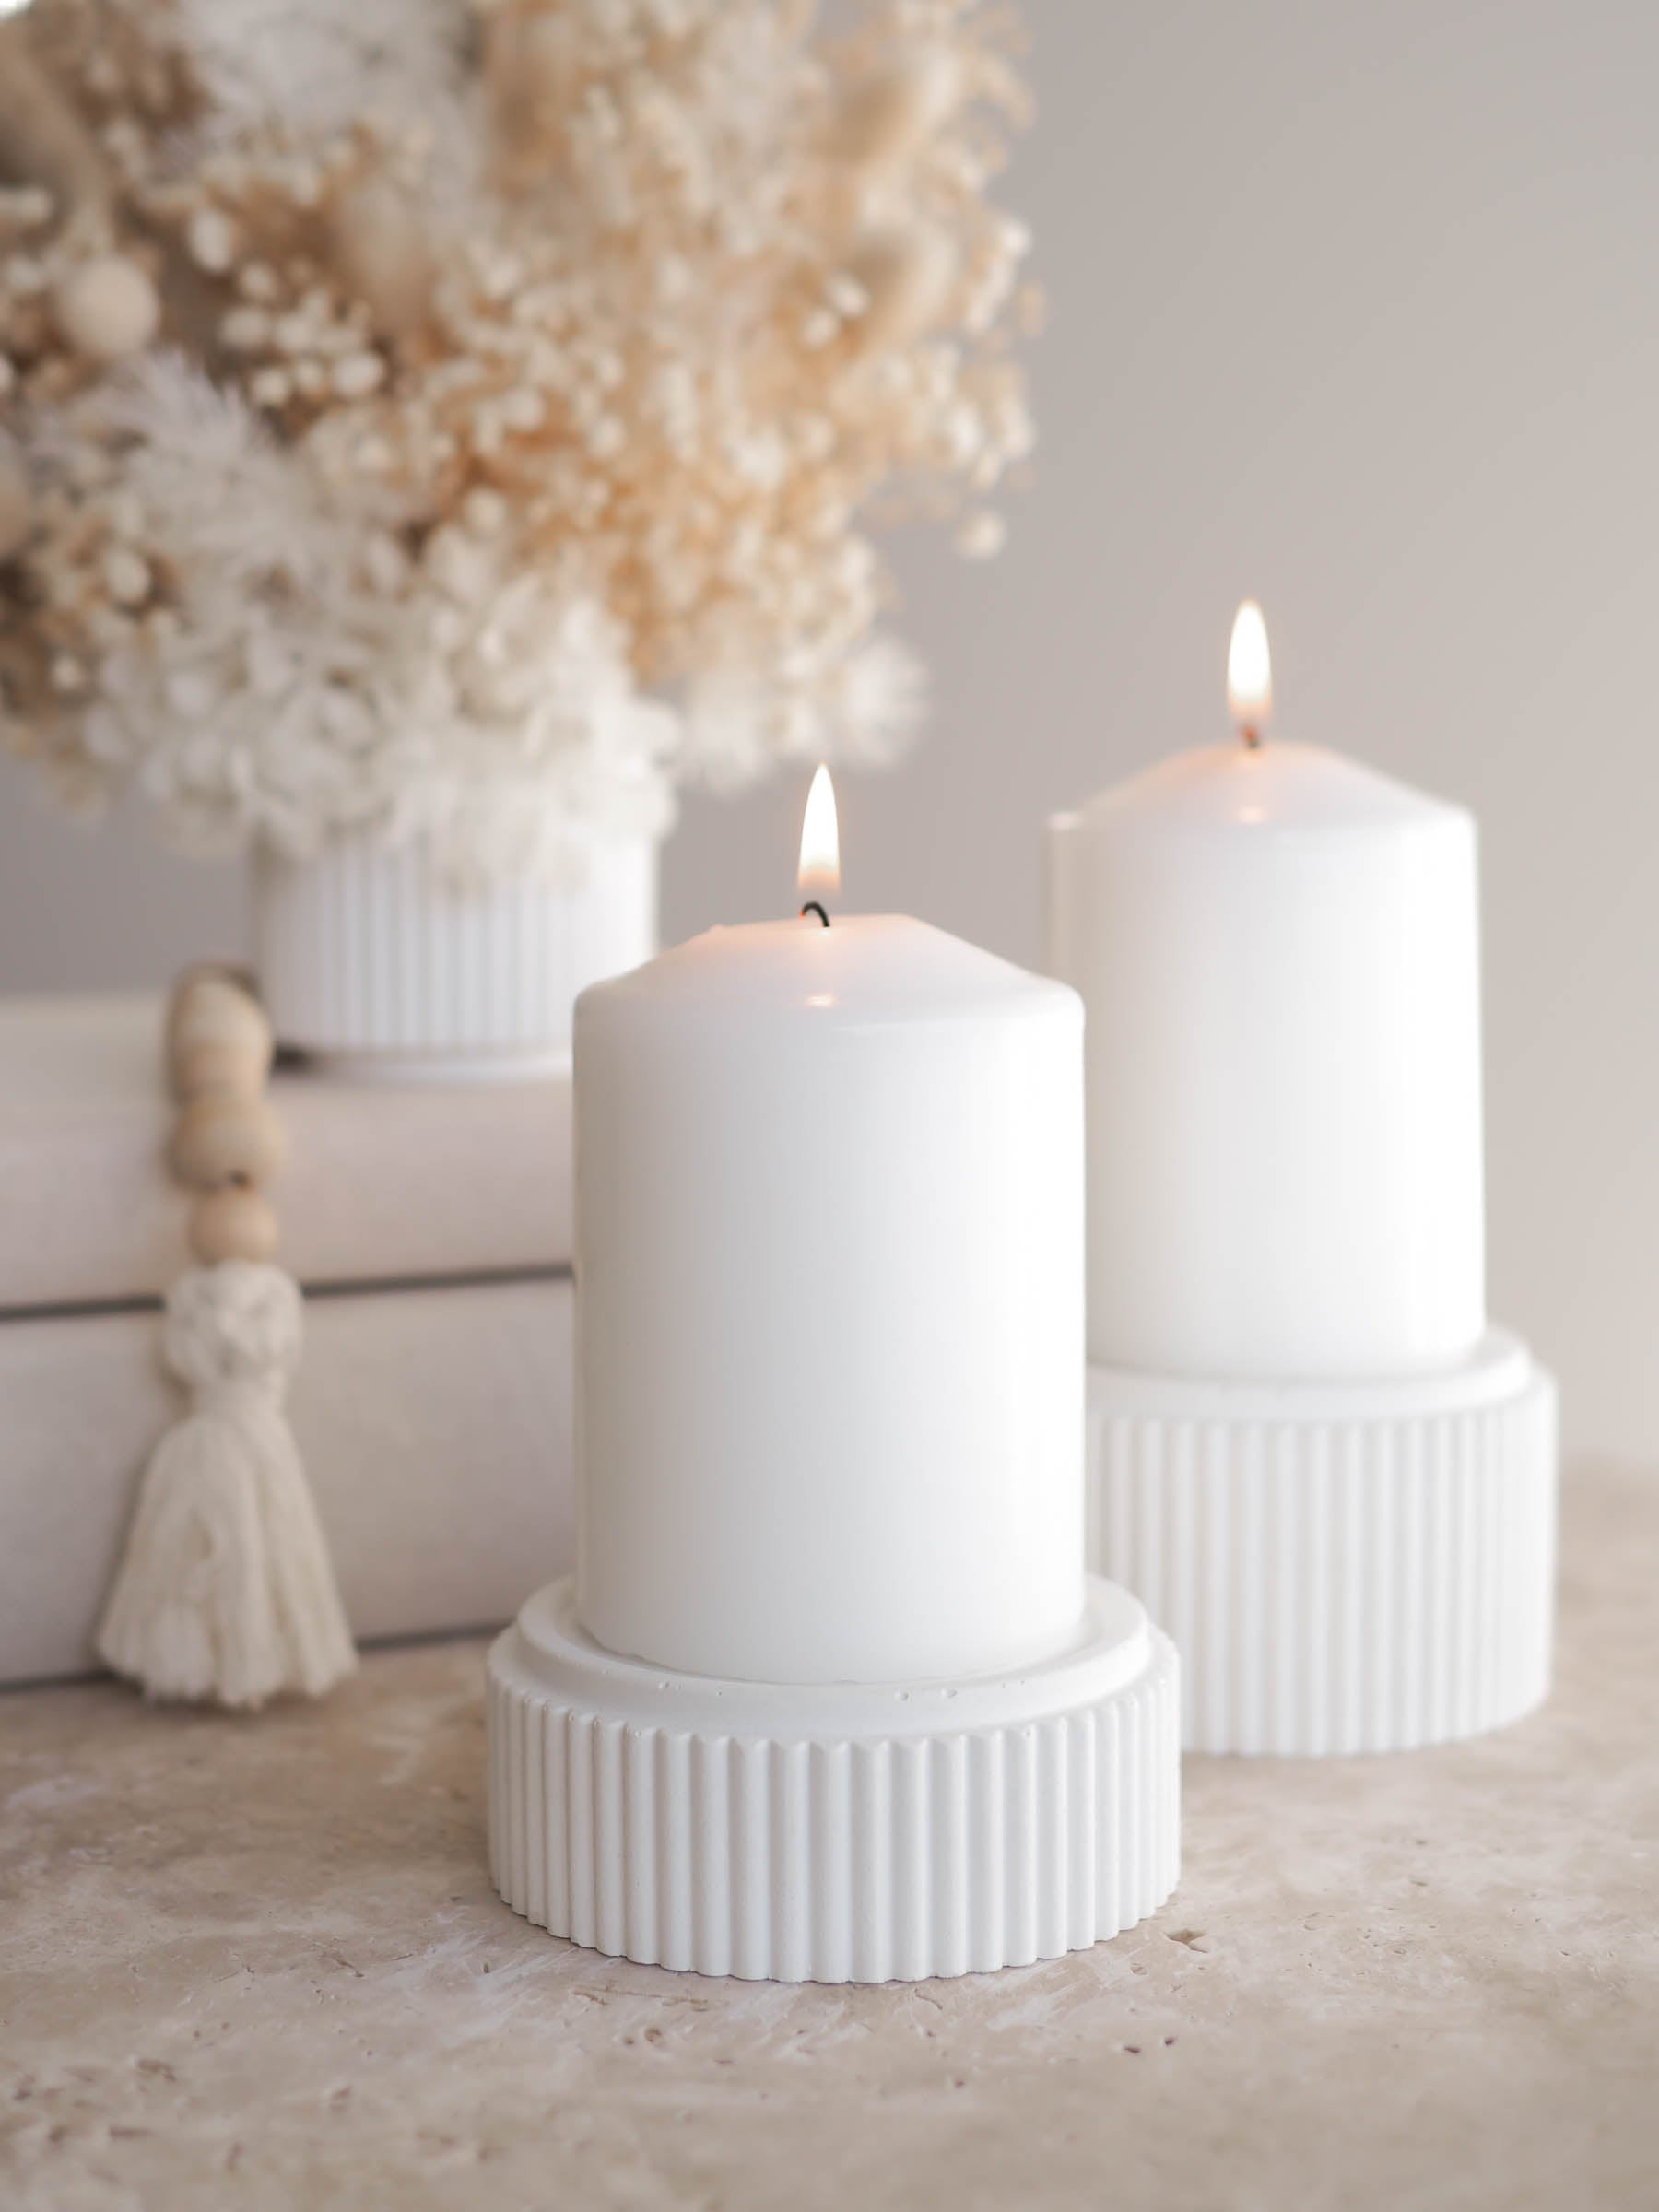 Small and large Mason candle holders with lit pillar candles on display